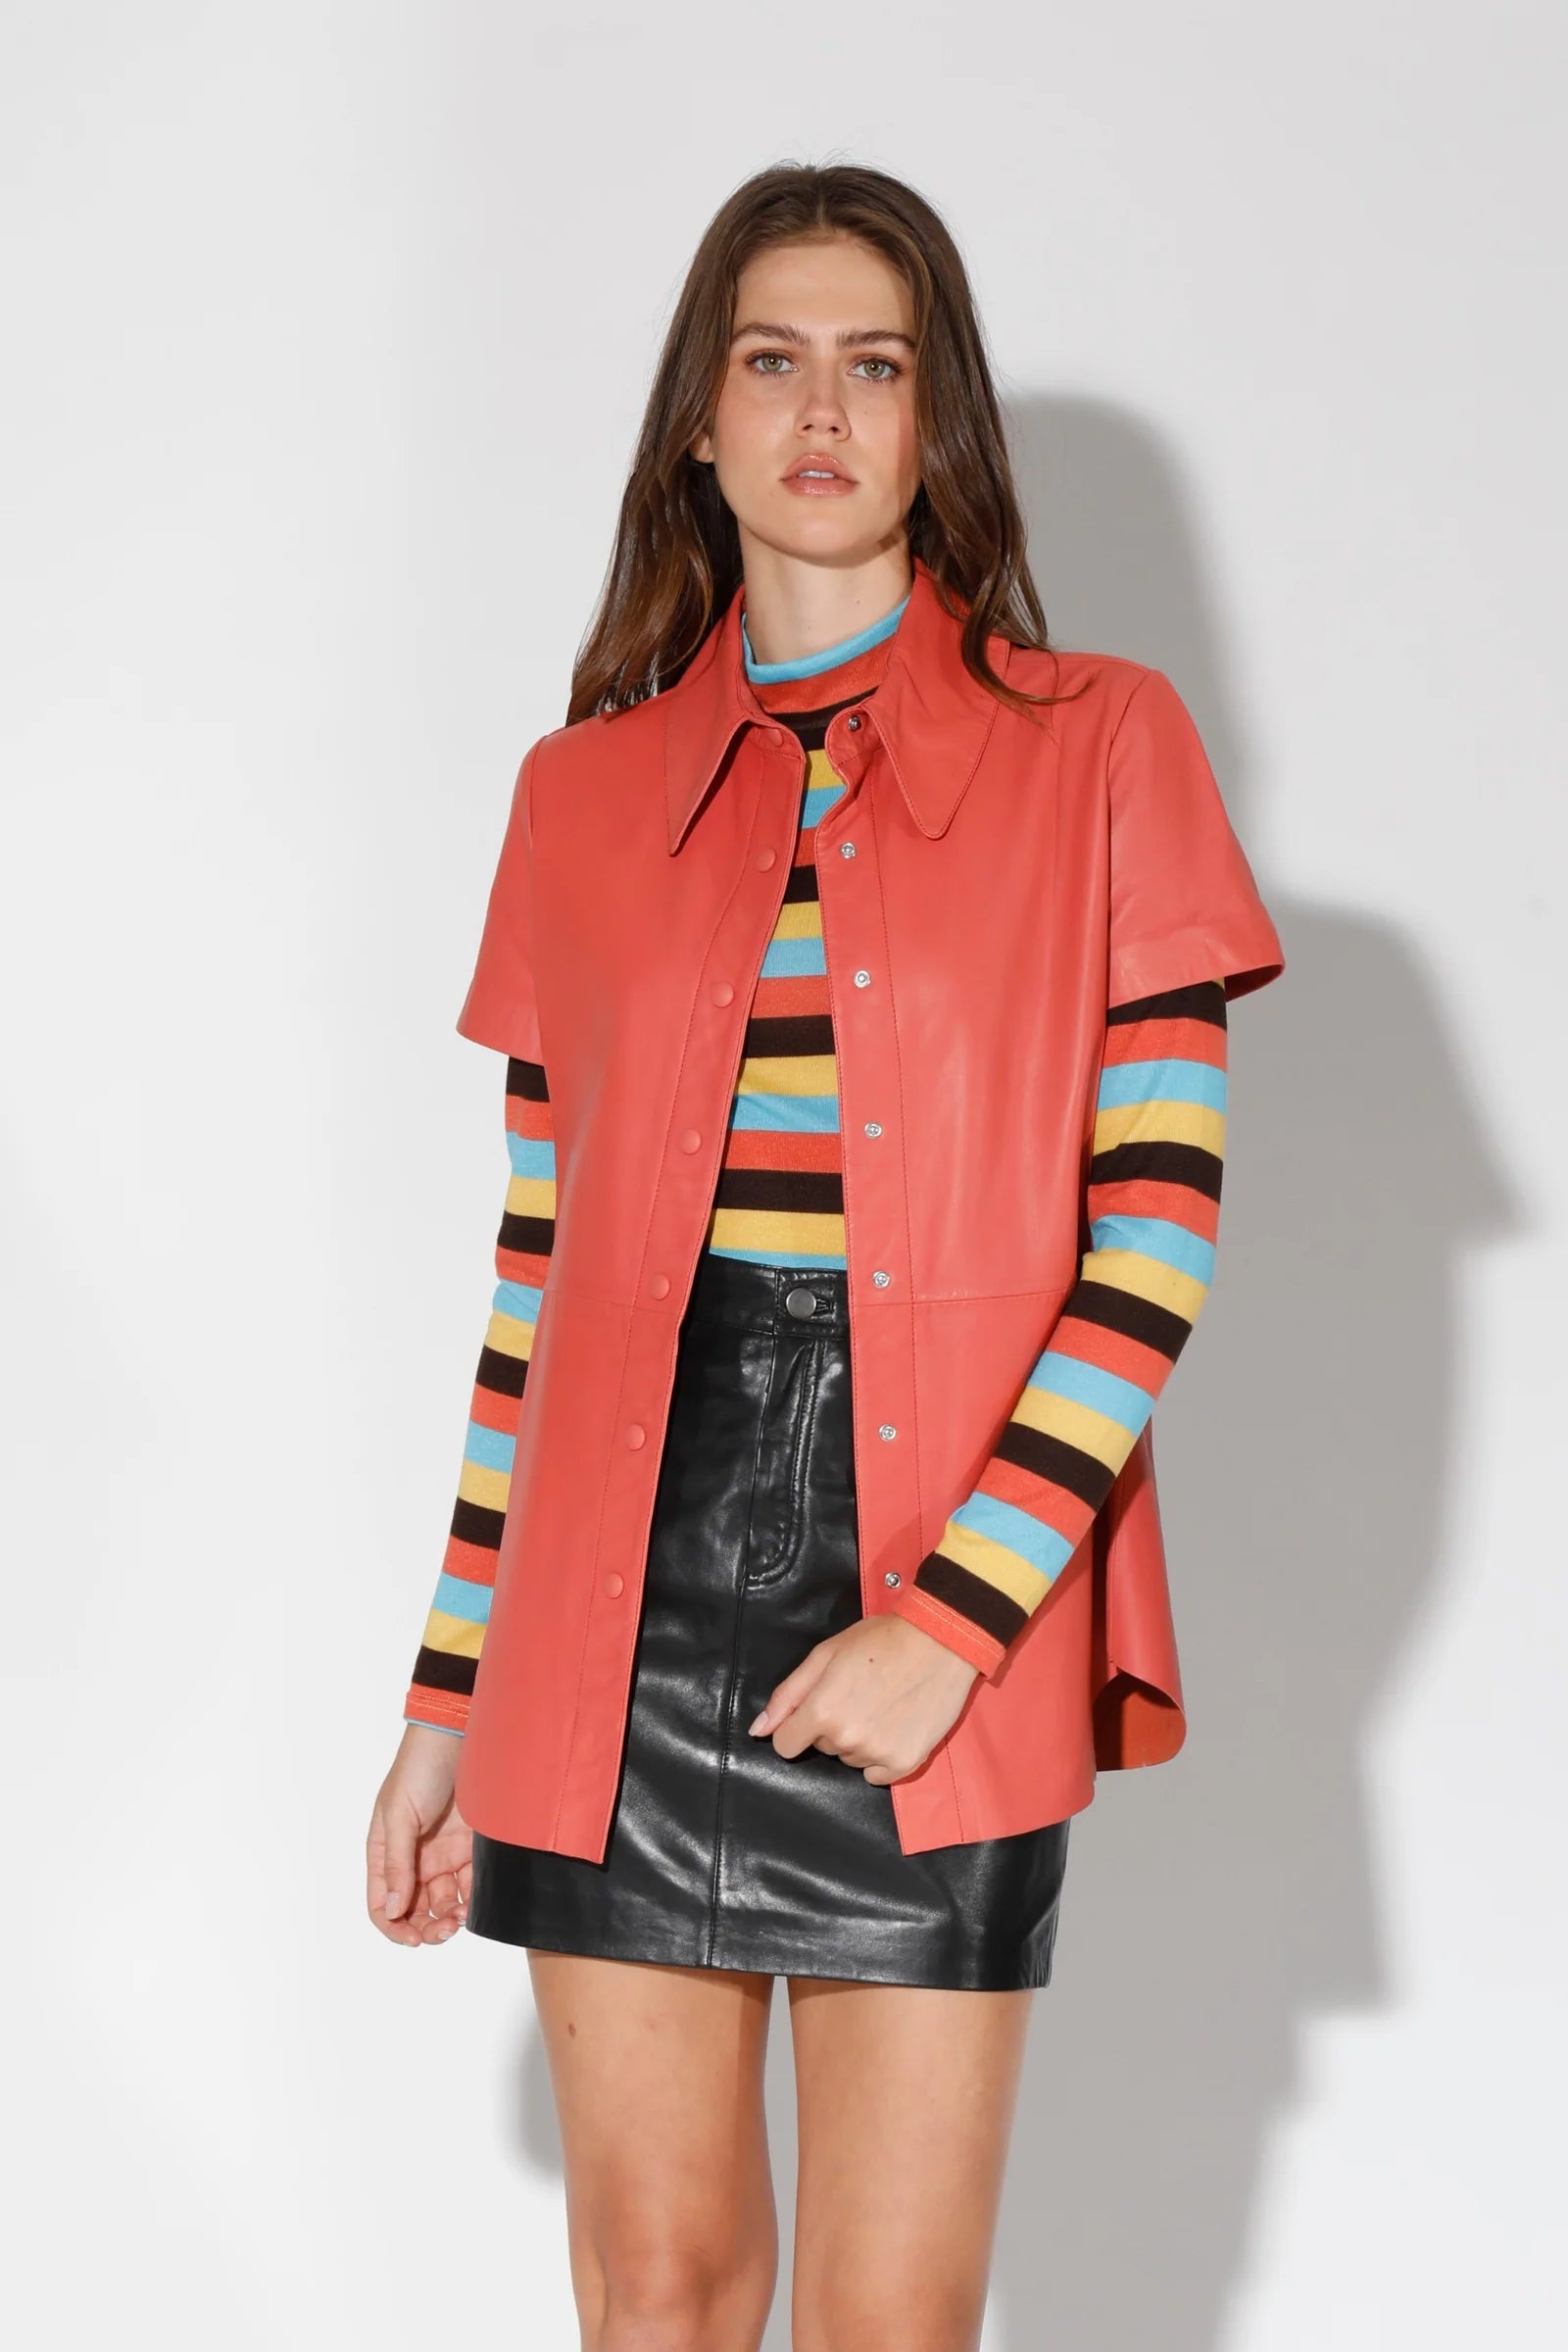 Walter Baker Laney Leather Top in Coral